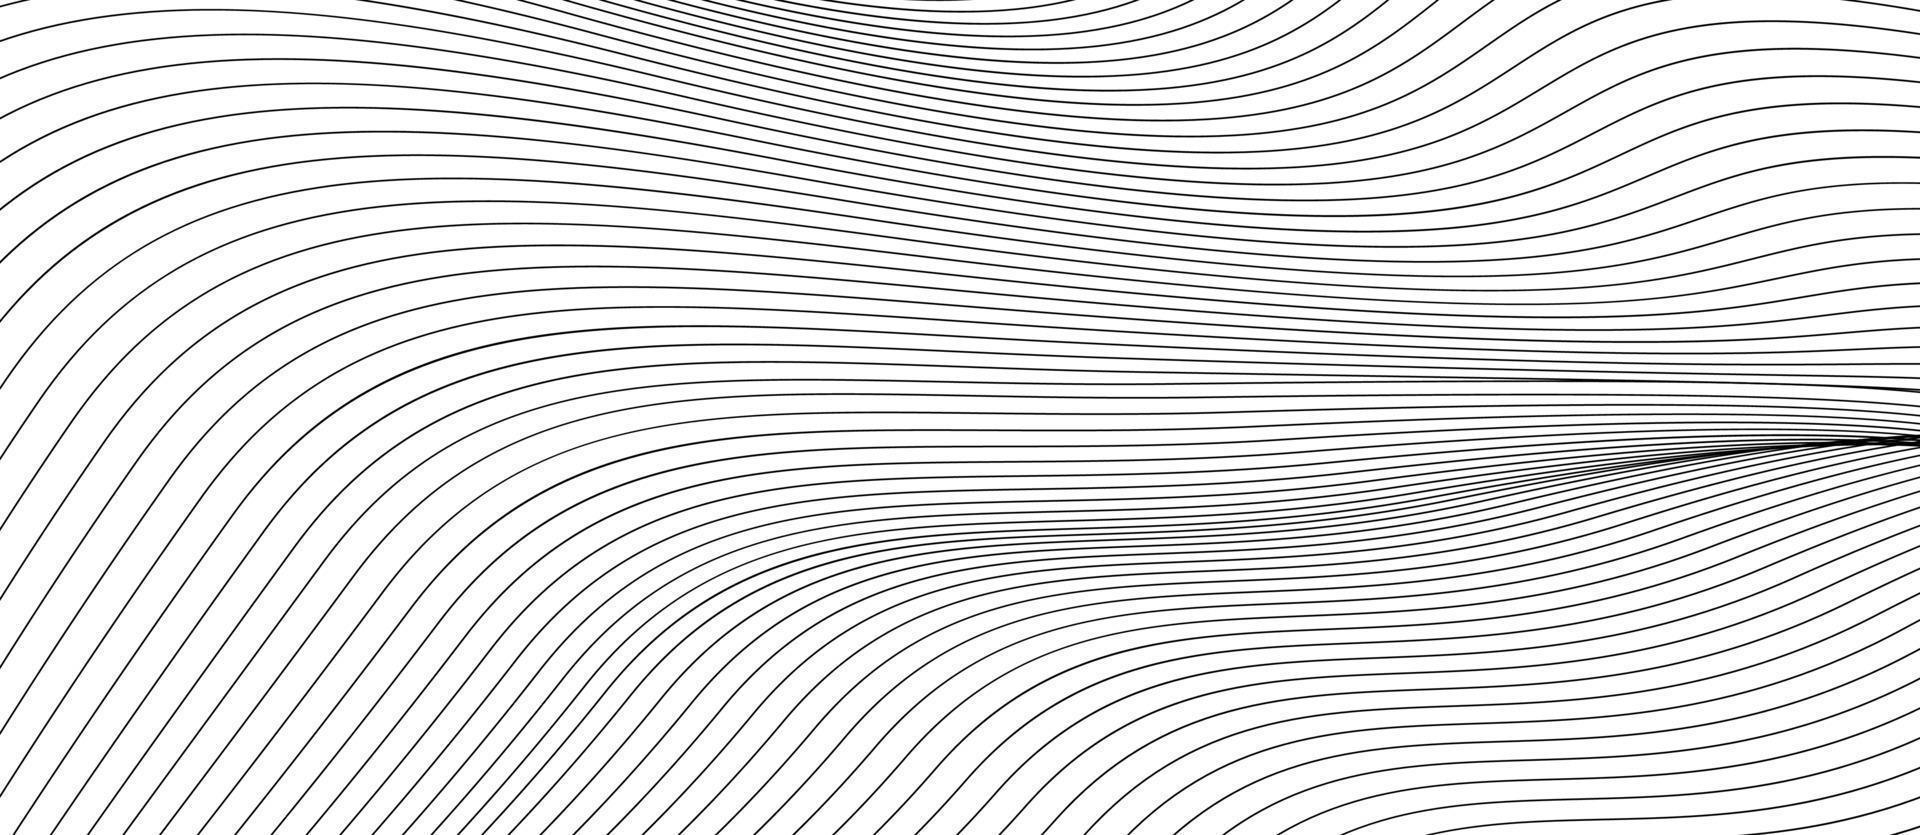 Thin line minimalistic abstract. pattern of lines on white background. business background lines wave design vector